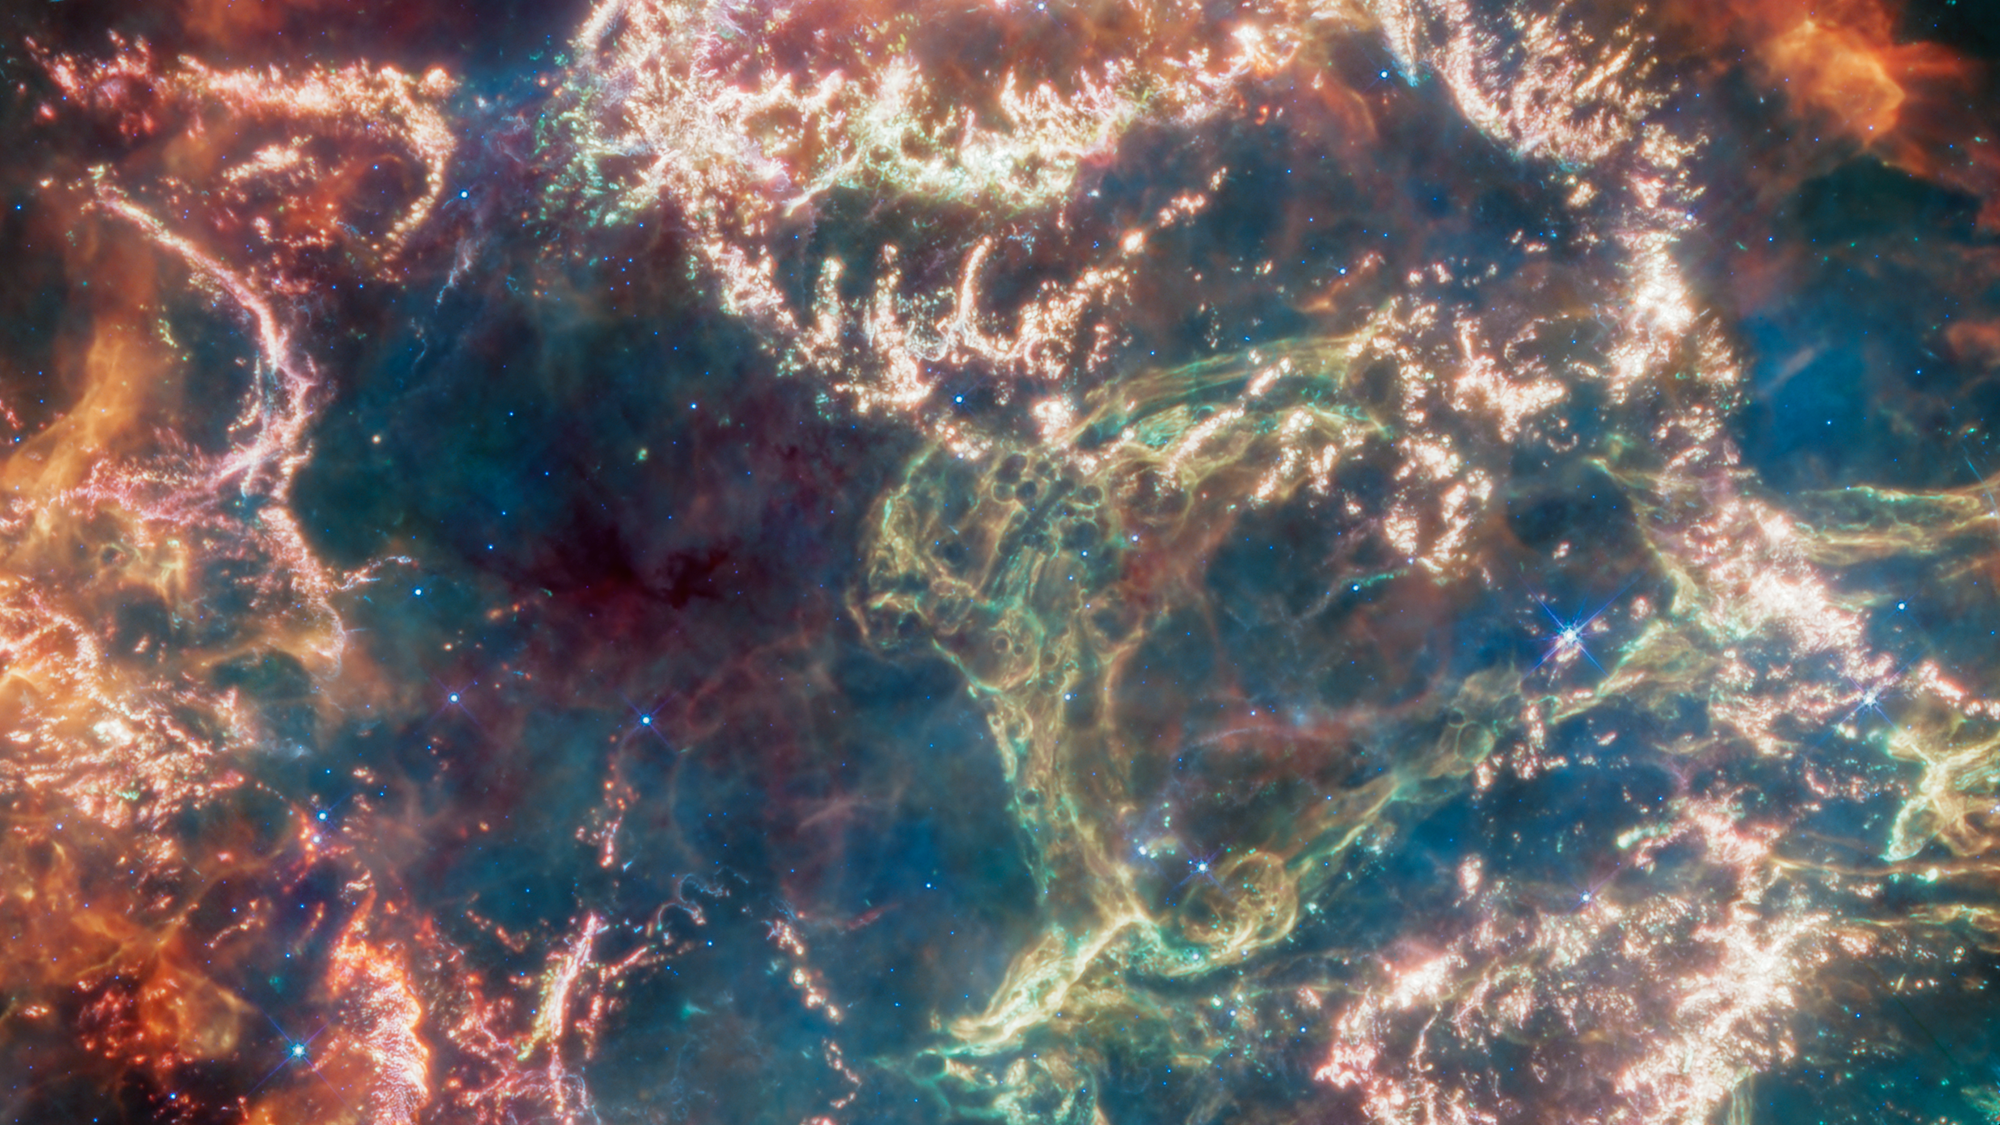 Cassiopeia A (Cas A) is a supernova remnant located about 11,000 light-years from Earth in the constellation Cassiopeia. It spans approximately 10 light-years. This image uses data from Webb’s Mid-Infrared Instrument (MIRI) to reveal Cas A in a new light. This image combines various filters with the color red assigned to 25.5 microns (F2550W), orange-red to 21 microns (F2100W), orange to 18 microns (F1800W), yellow to 12.8 microns (F1280W), green to 11.3 microns (F1130W), cyan to 10 microns (F1000W), light blue to 7.7 microns (F770W), and blue to 5.6 microns (F560W).